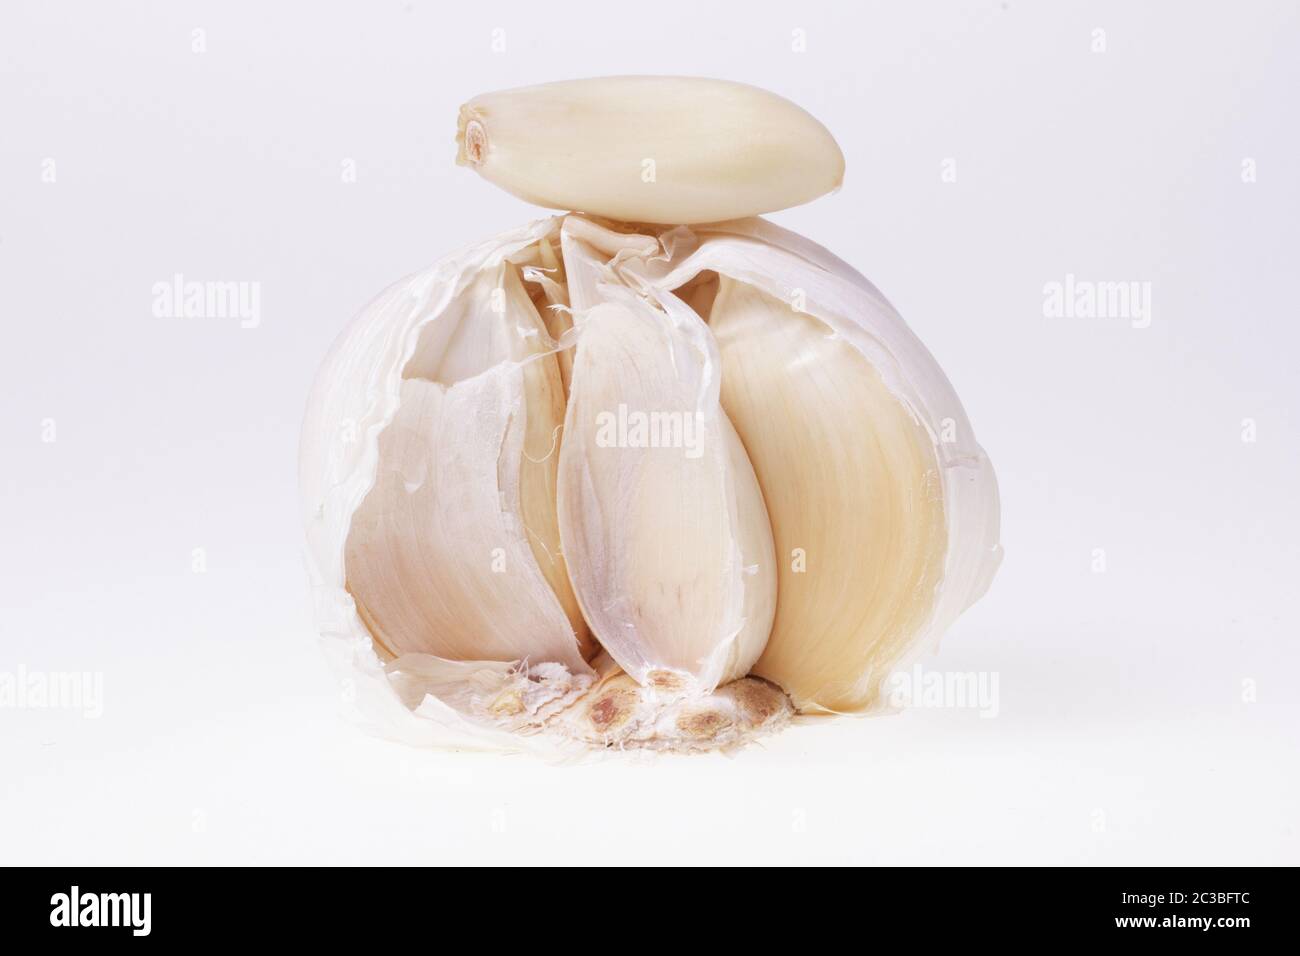 Opened white garlic tuber, cloves with peel, isolated on white background. Food, health concept Stock Photo